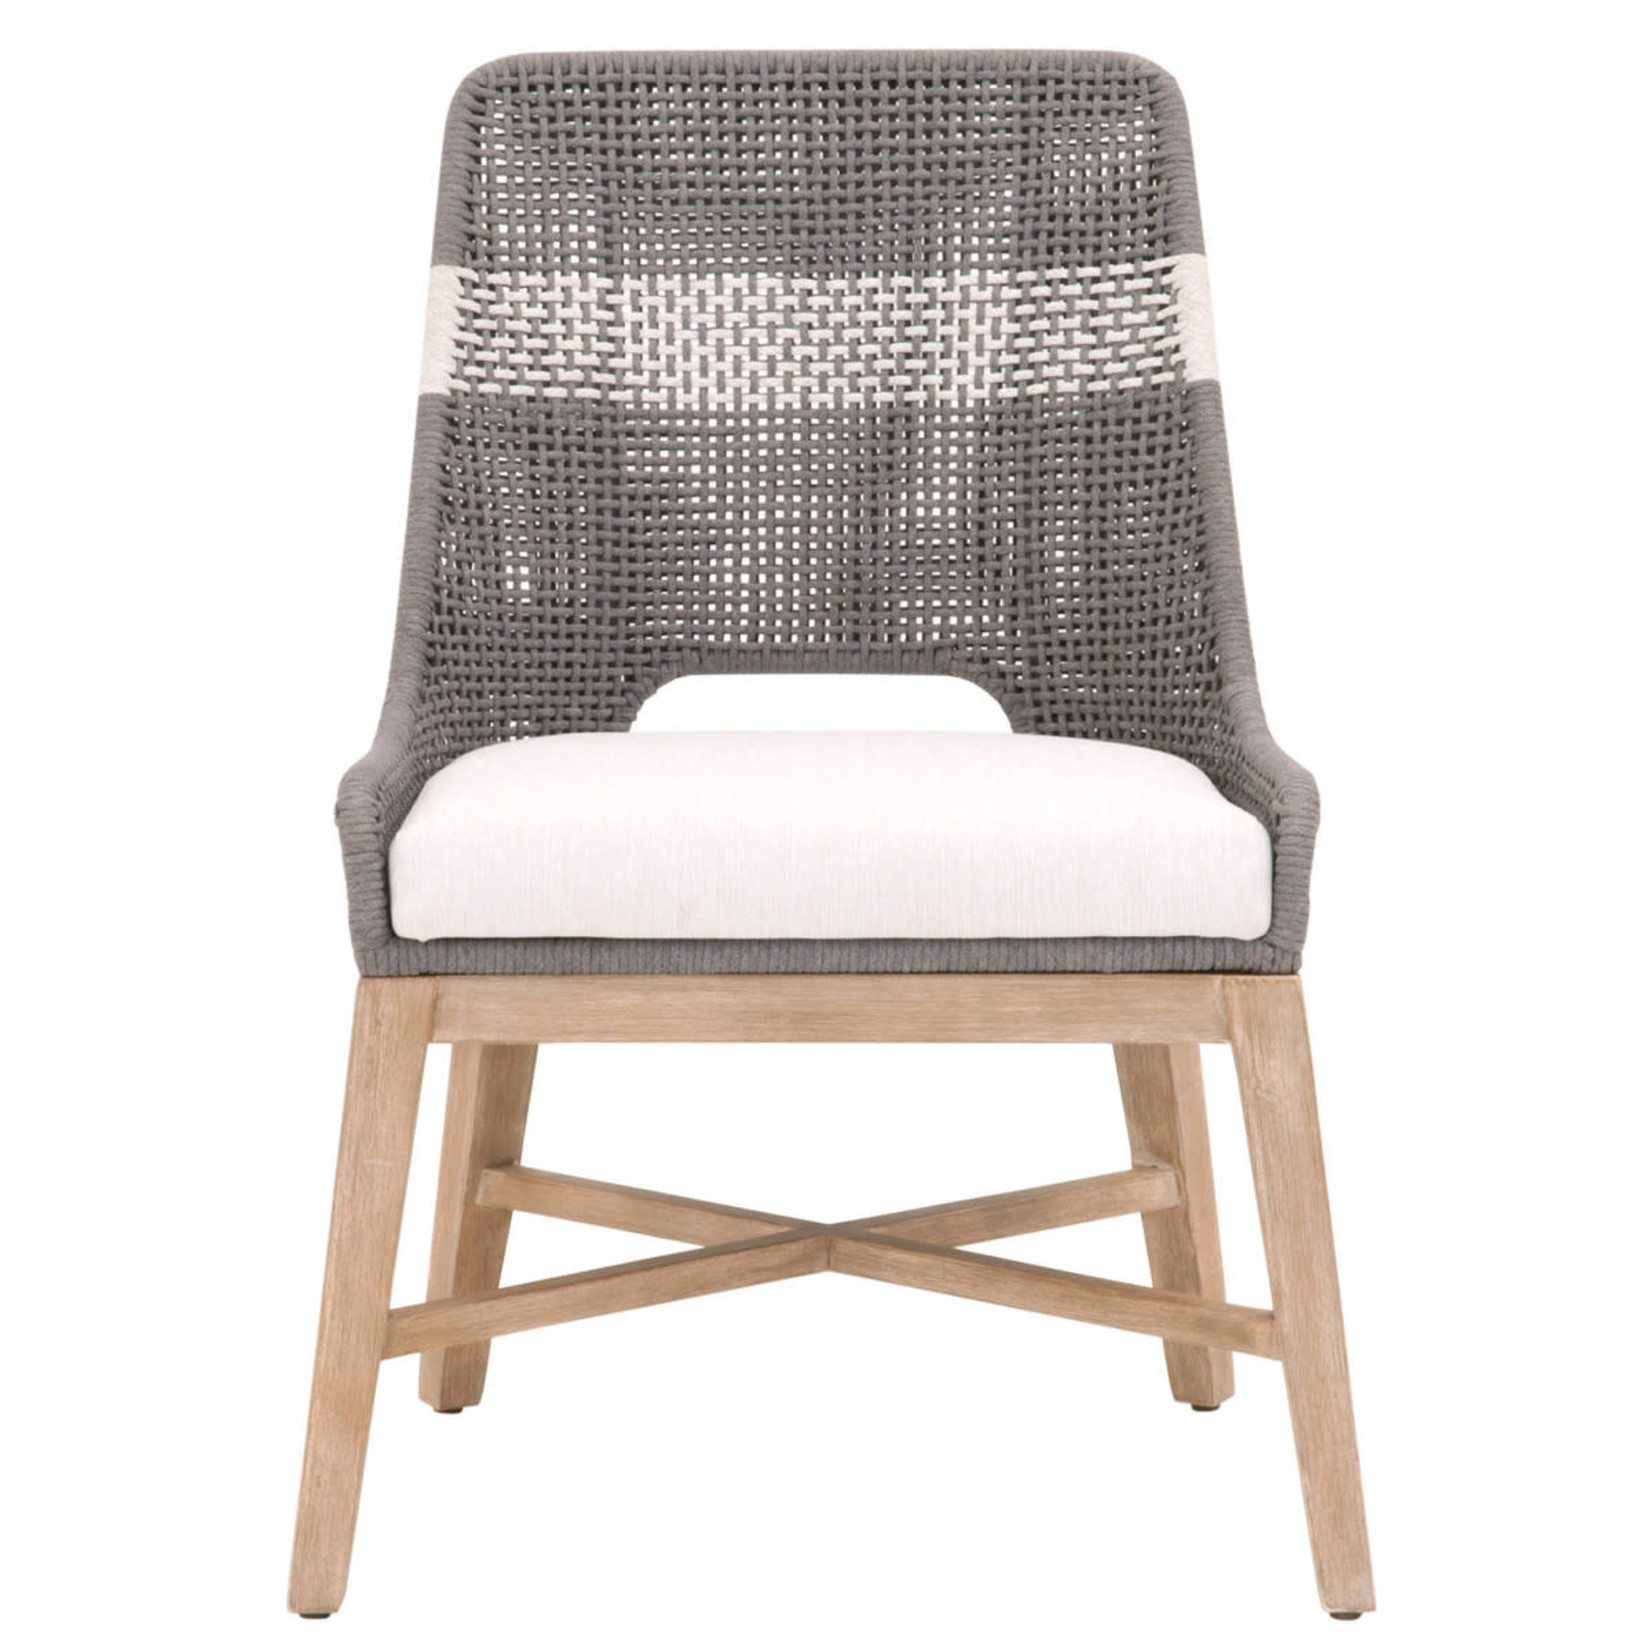 Tapestry Dining Chair - Dove Flat Rope/Wht Speckle/Nat Gray